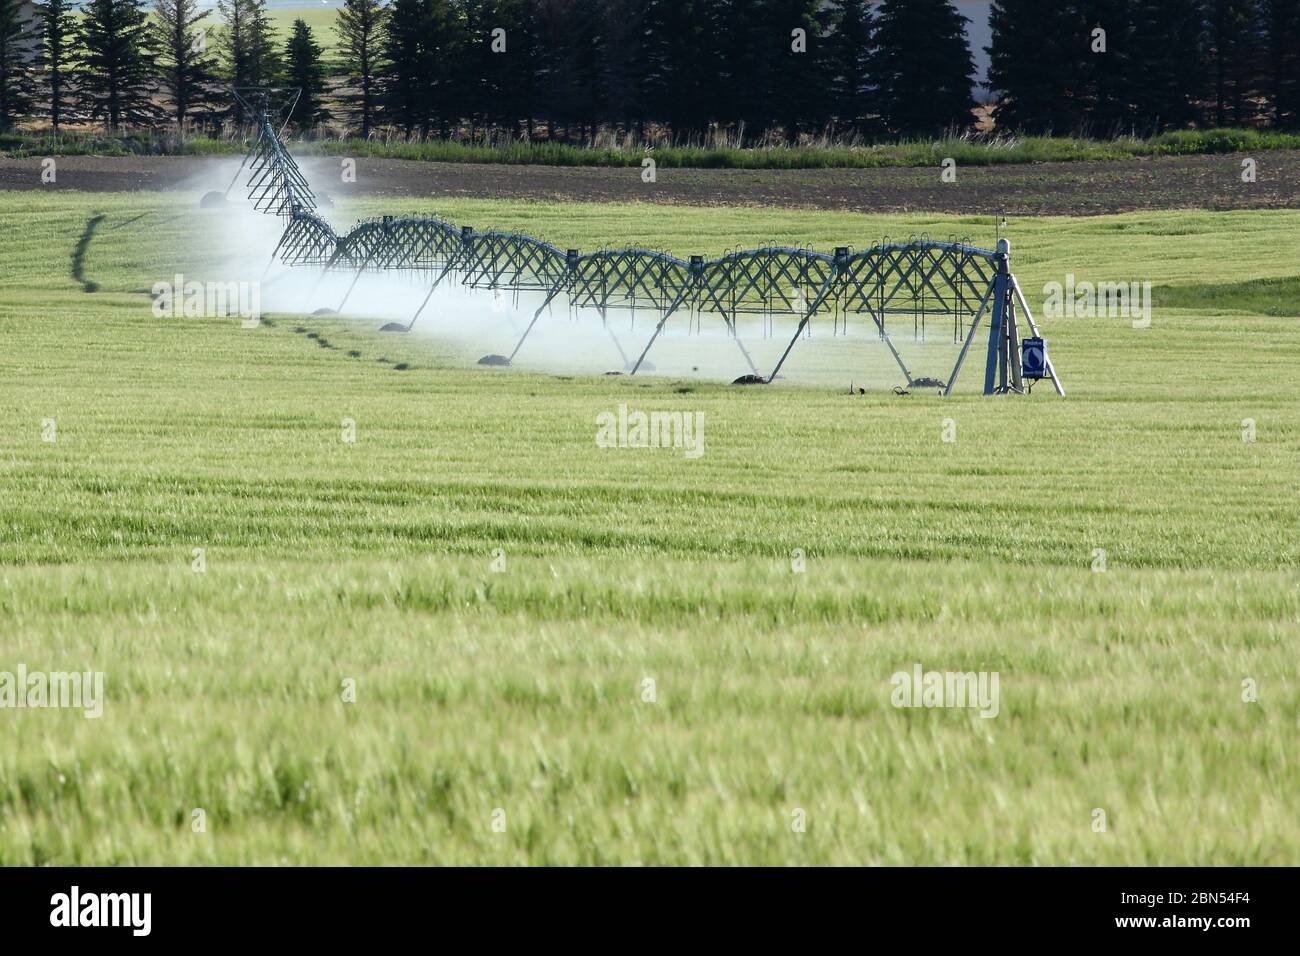 An agricultural center pivot sprinkler used to irrigate a barley field in the fertile farm fields of Idaho. Stock Photo